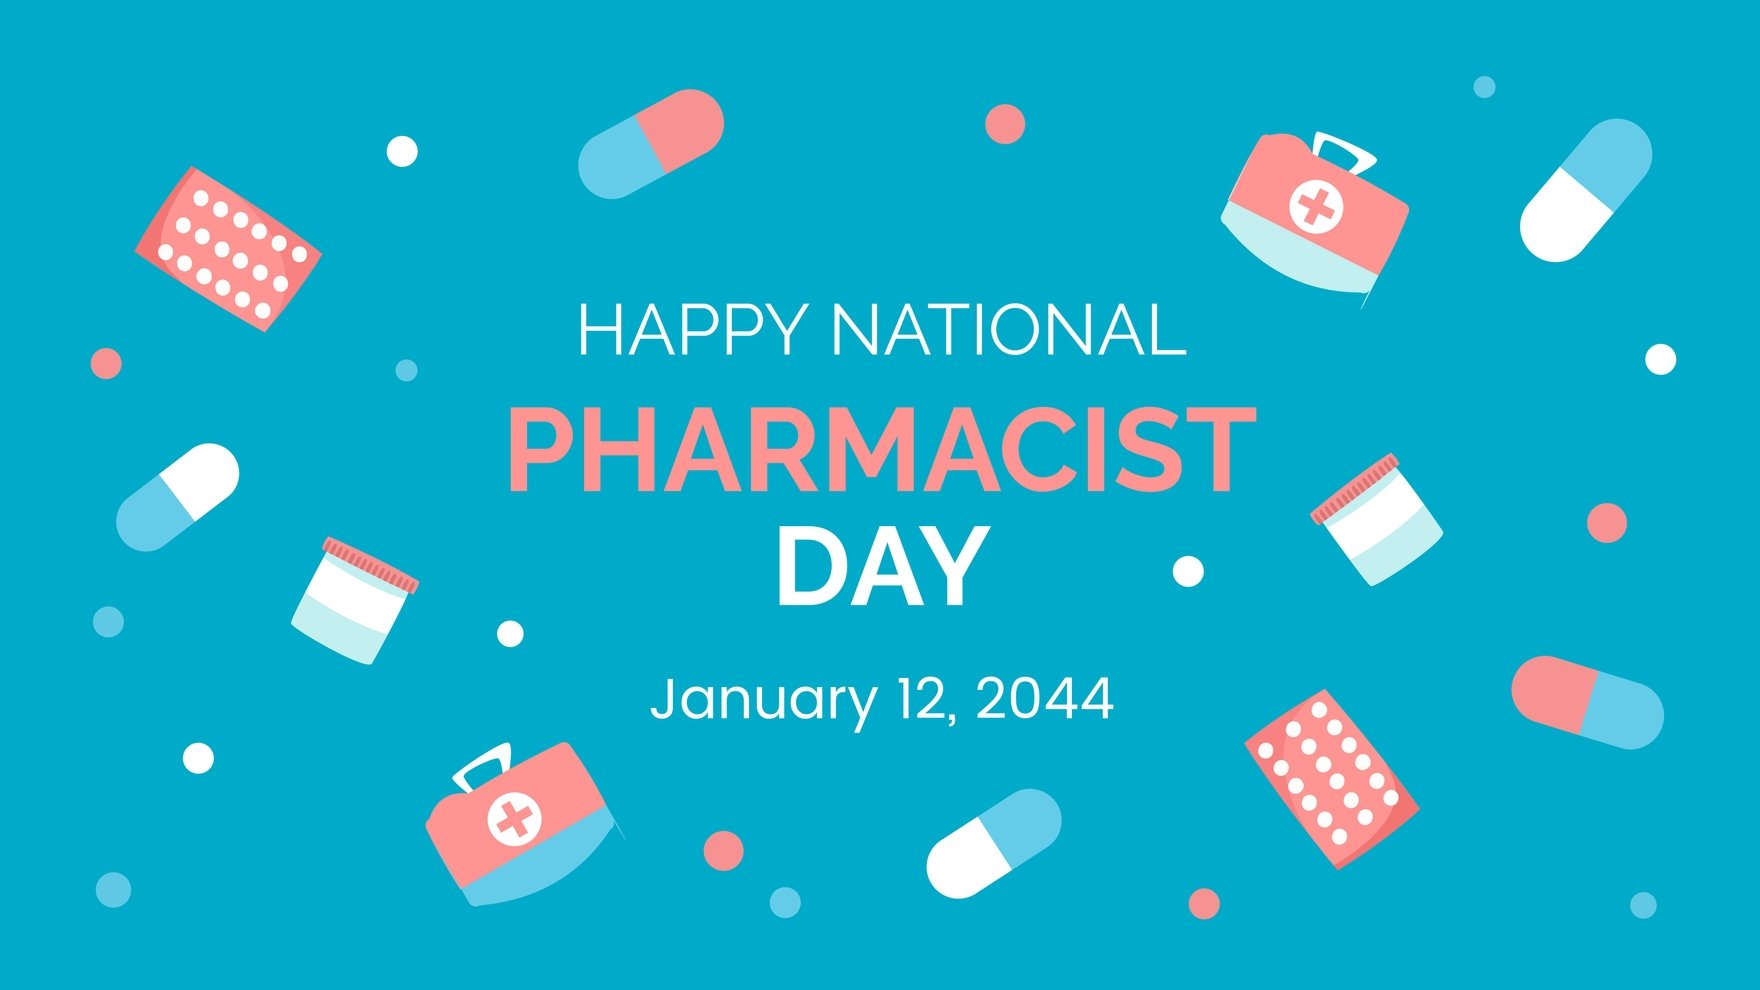 National Pharmacist Day Wishes Background in EPS, JPEG, PDF, PSD, SVG